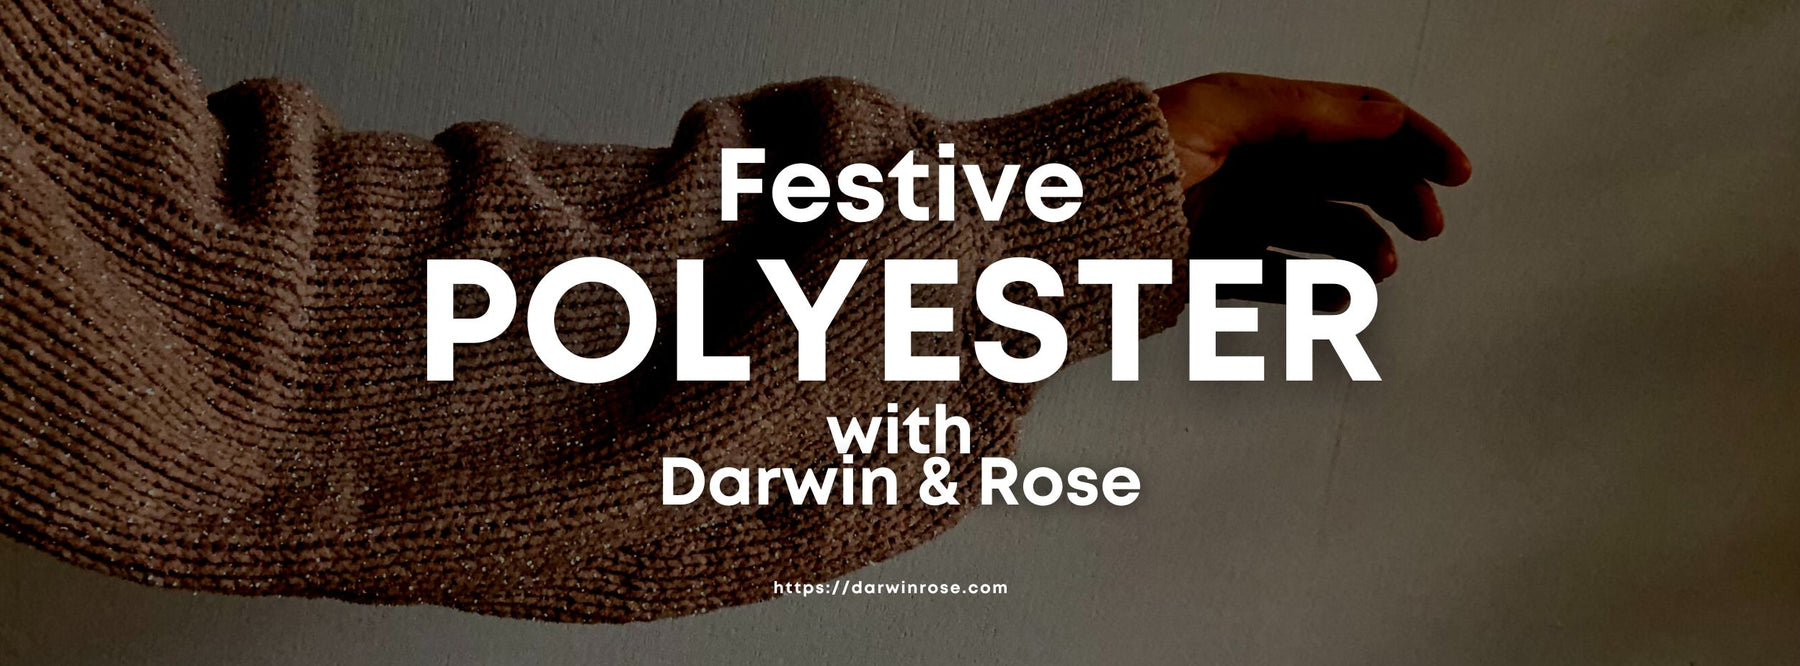 Festive Polyester Pillowcases with Darwin & Rose Home Decor